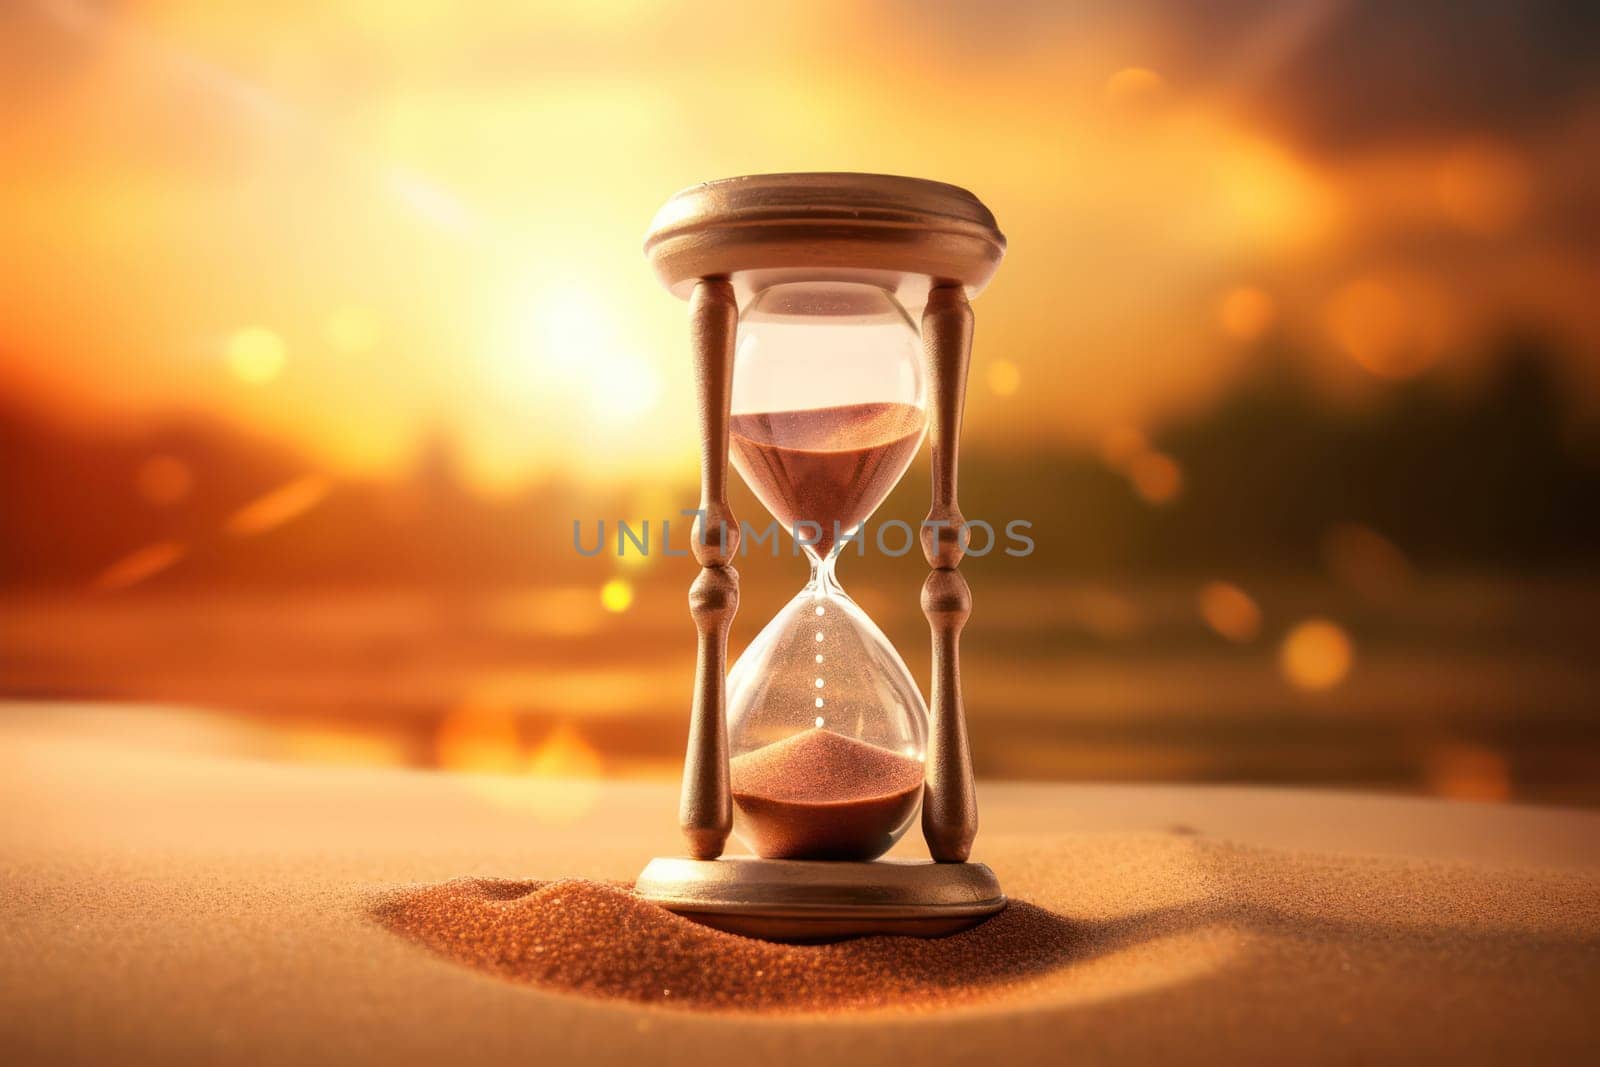 Time Passing: A Retro Vintage Hourglass measuring the Speed of Business Pressure with a Close-up View on Falling Sand, Symbolizing Urgency and Stress in a Tranquil Sunset Background by Vichizh